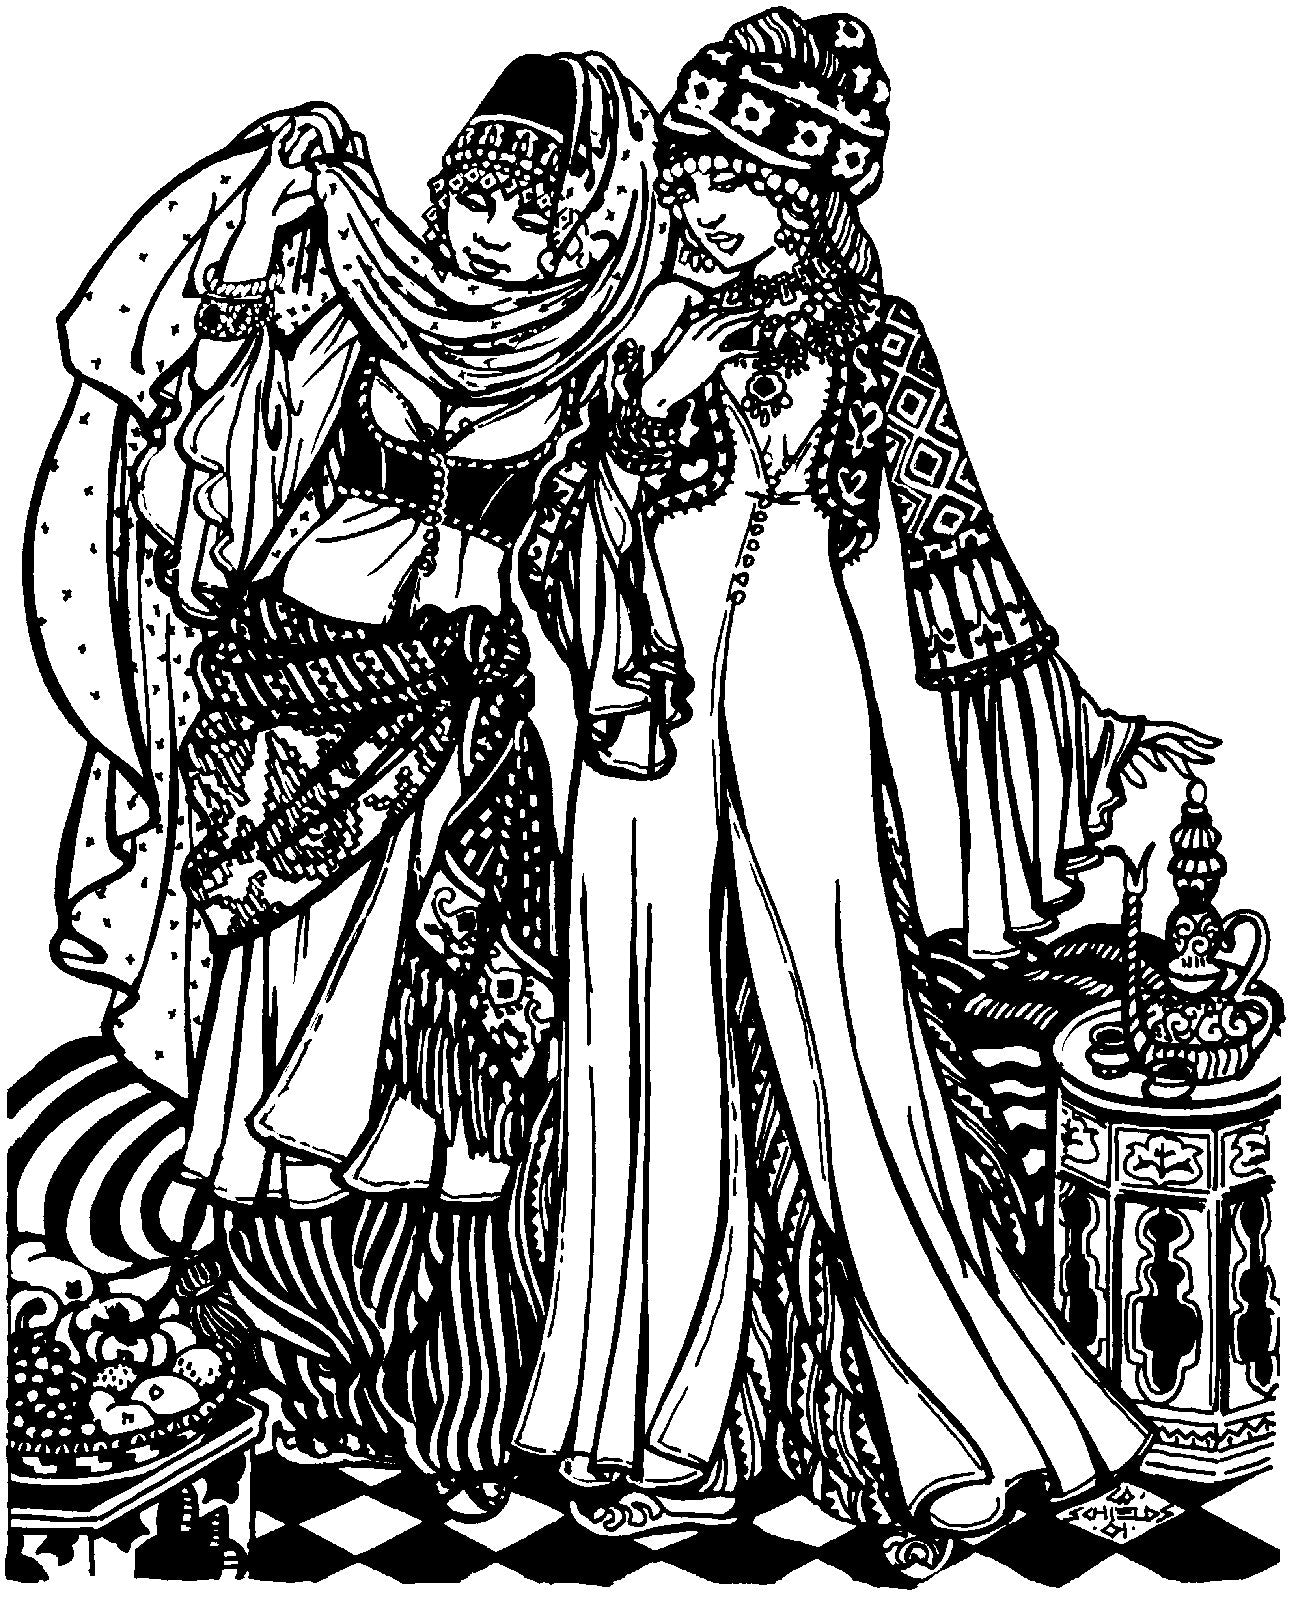 Black and white pen and ink drawing by Gretchen Shields.  Two people standing side by side Wearing traditional Turkish clothing. 